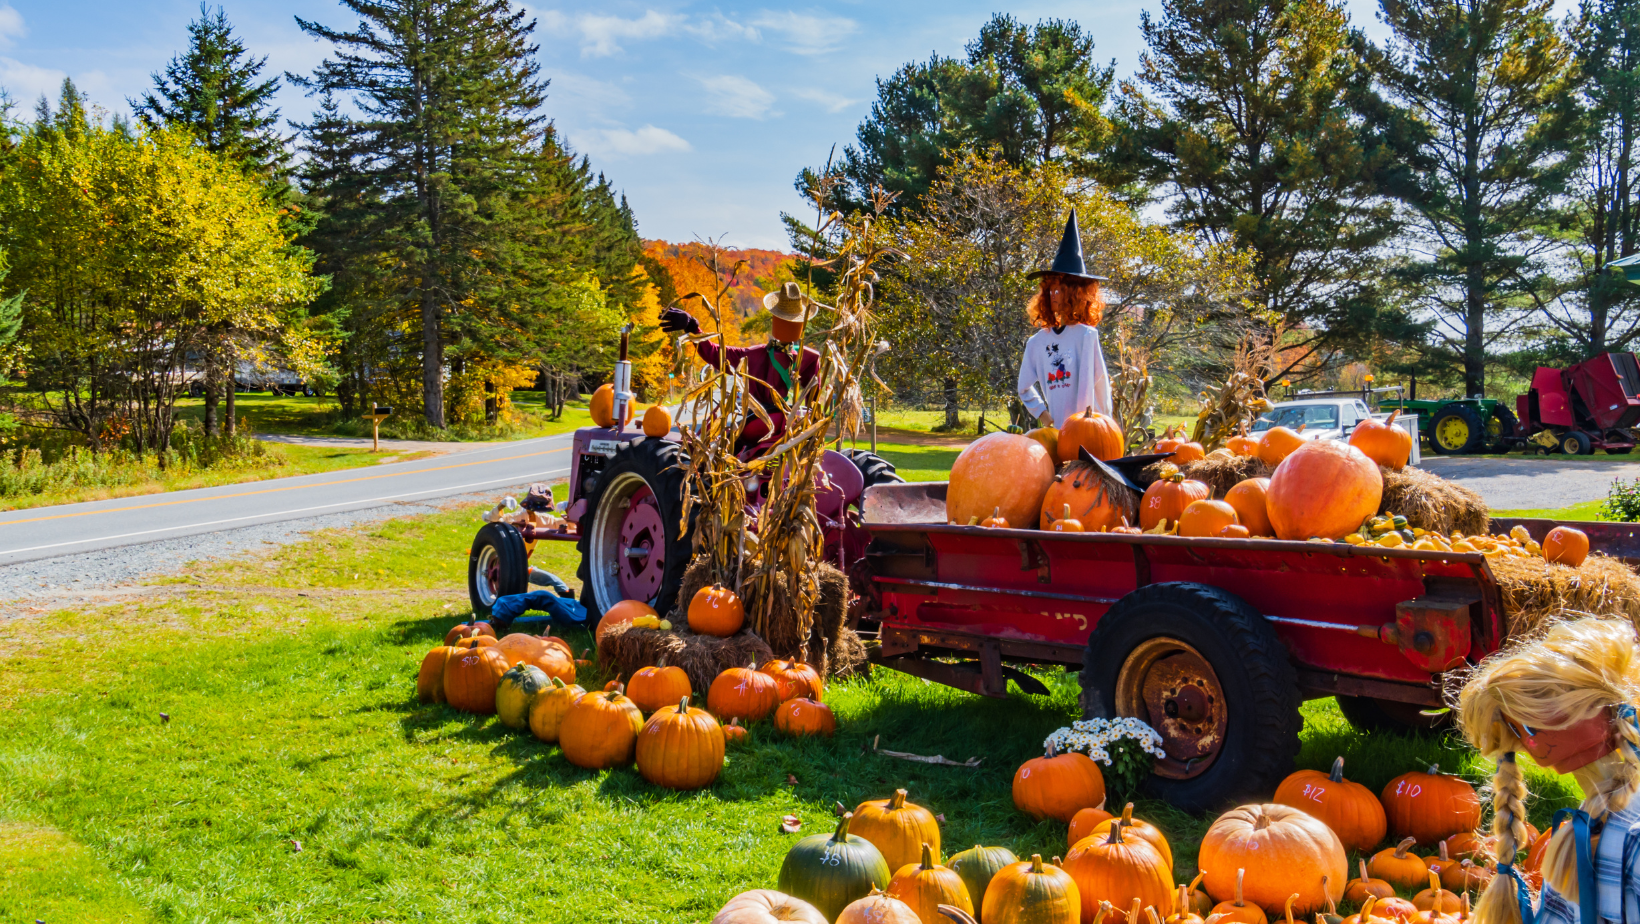 Tractor and wagon full of pumpkins, scarecrows, and corn stalks